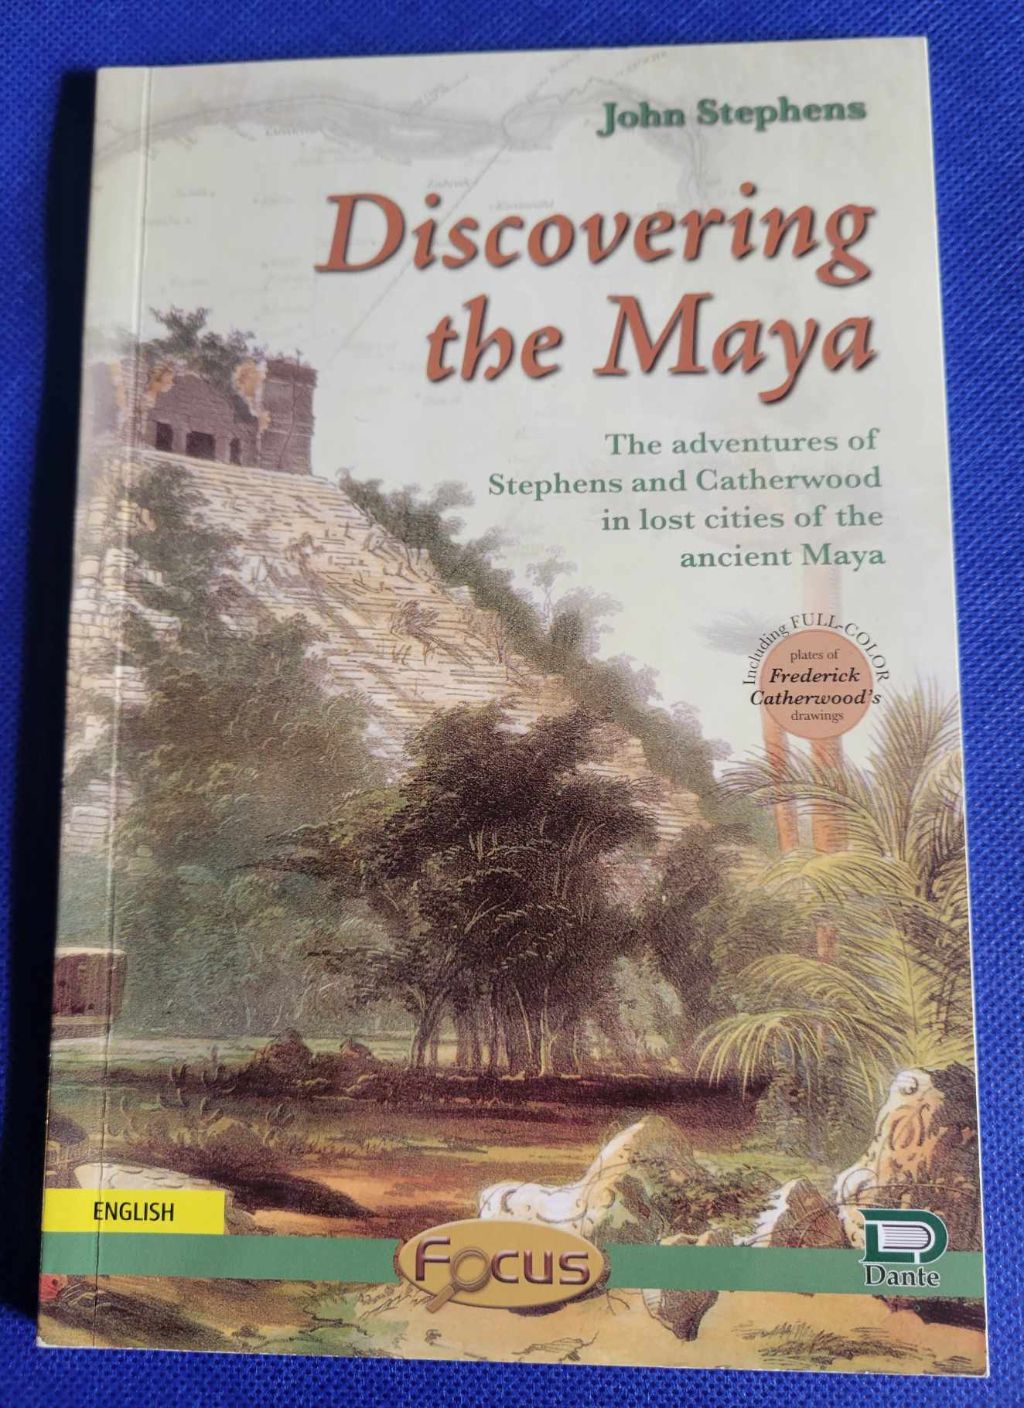 Discovering the Maya - Stephens, John: The Adventures of Stephens and Catherwood in lost cities of the Ancient Maya